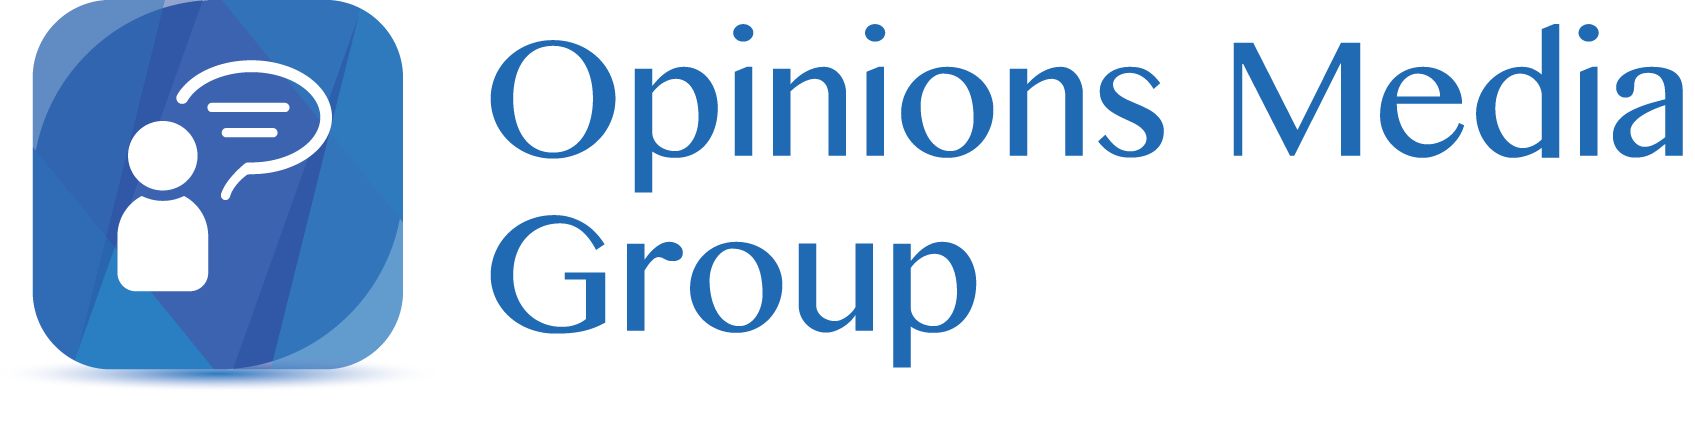 Opinions Media Group